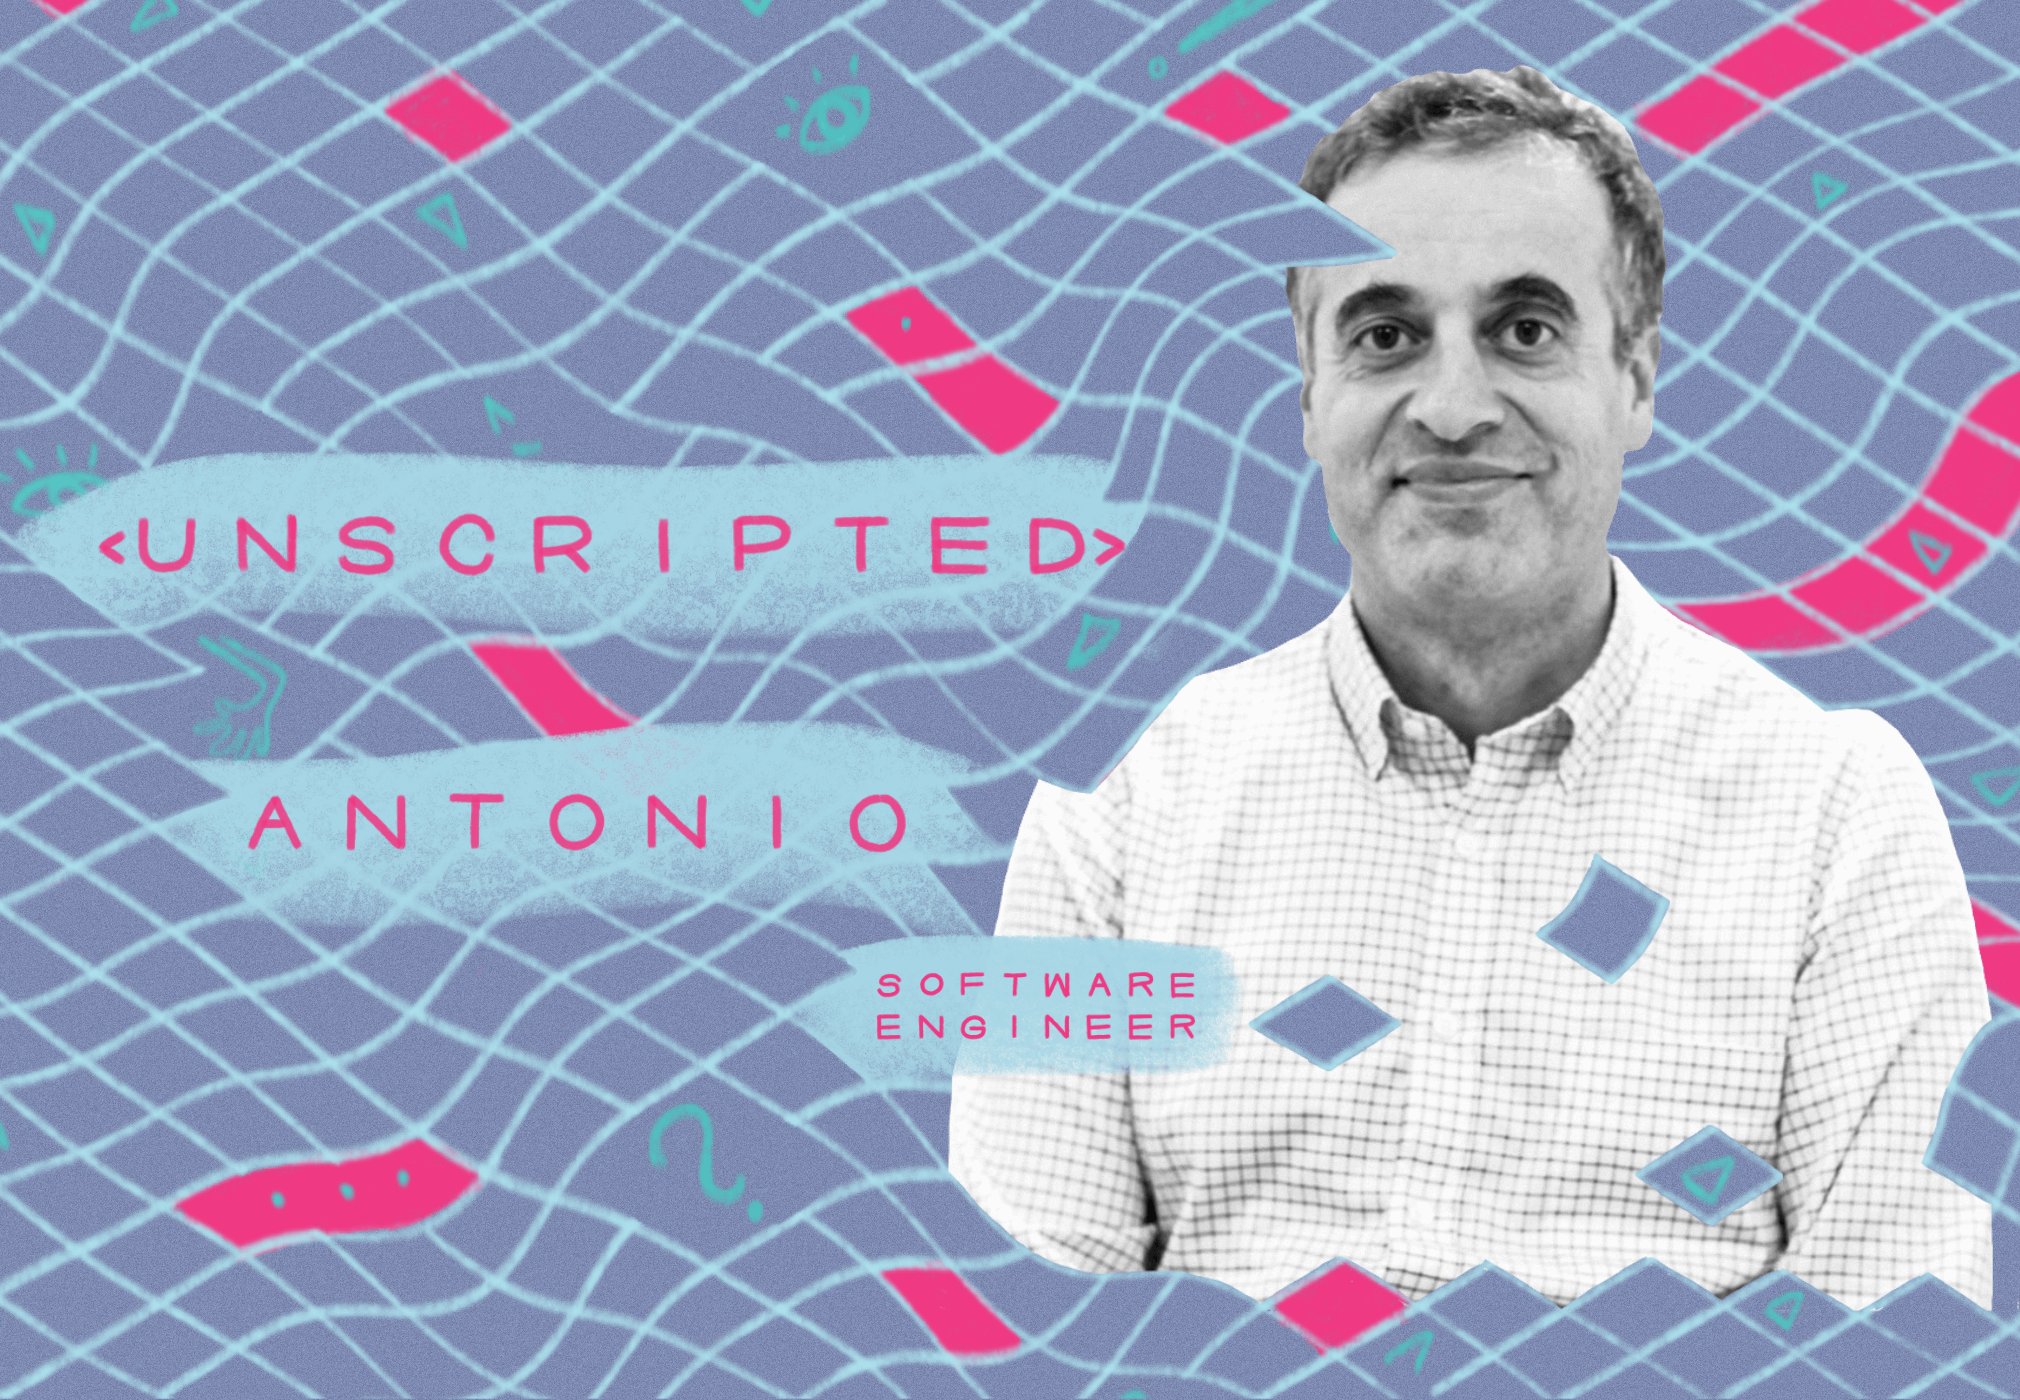 Unscripted: Q&A with Antonio, Software Engineer